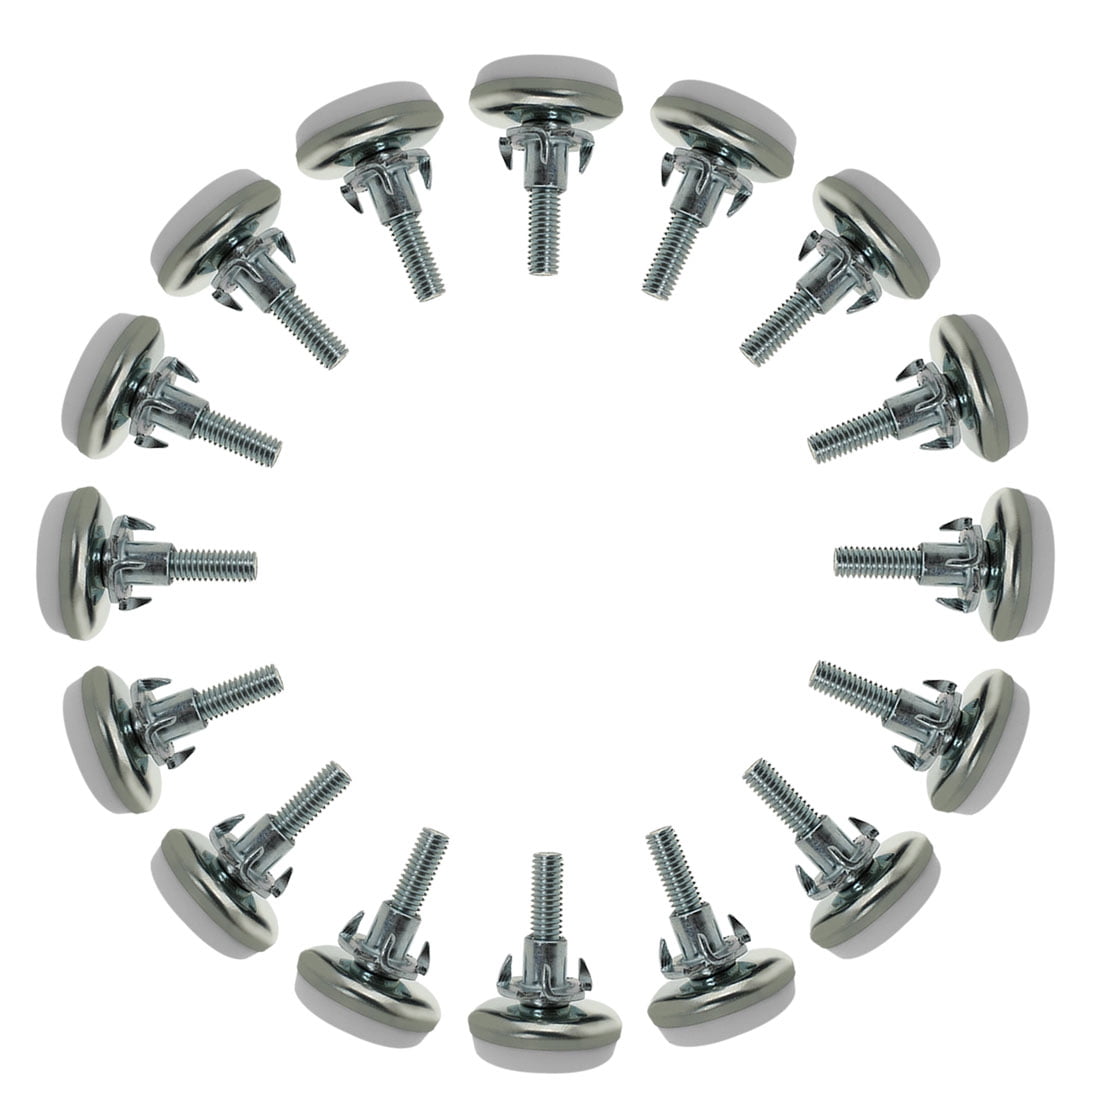 Details about   M6 x 25 x 28mm Leveling Feet Adjustable Leveler with T-nuts for Chair Desk Leg 